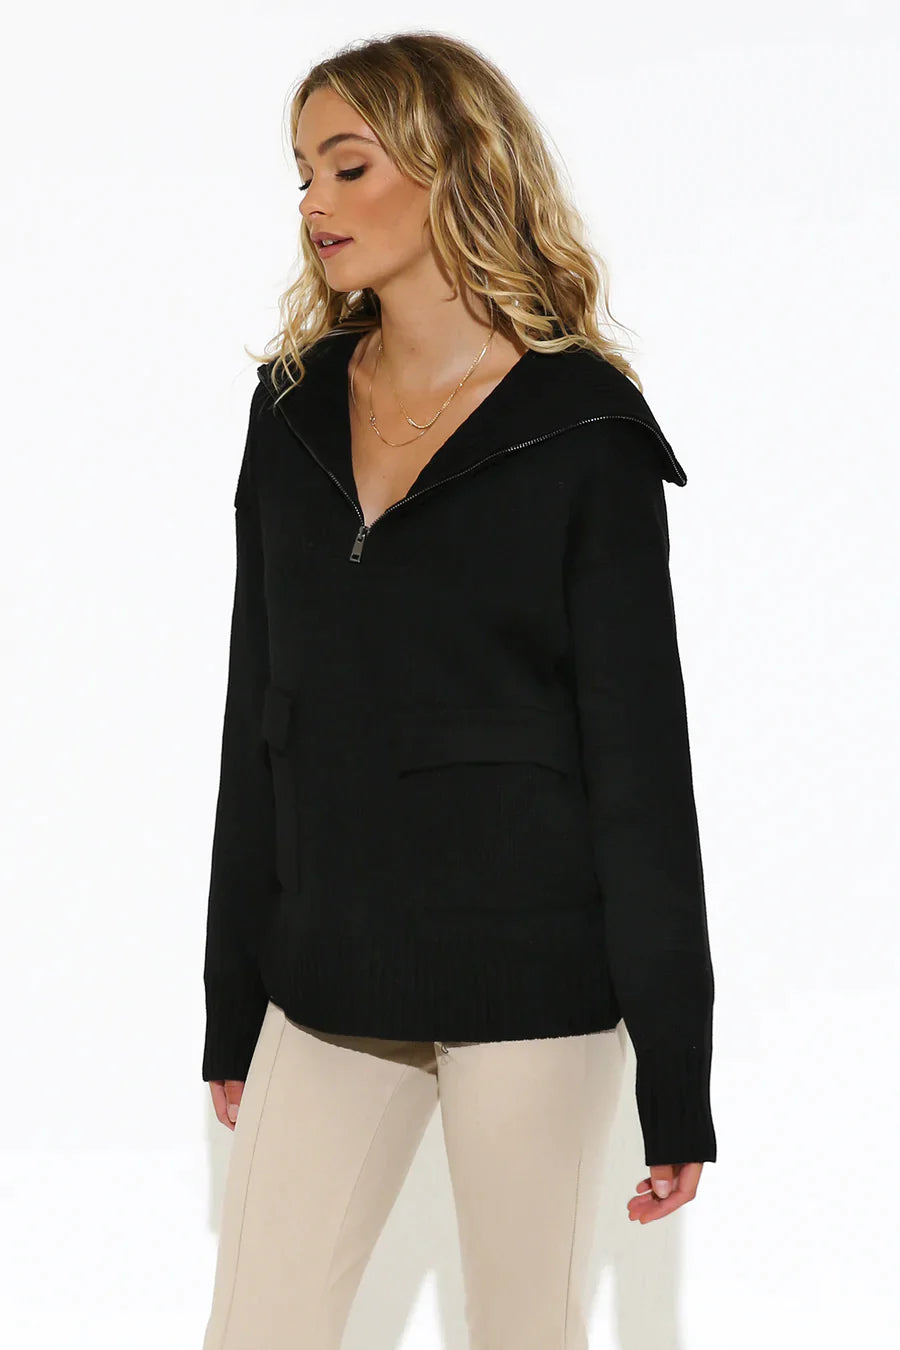 Pre-loved, Madison the Label Charlize Knit, Black